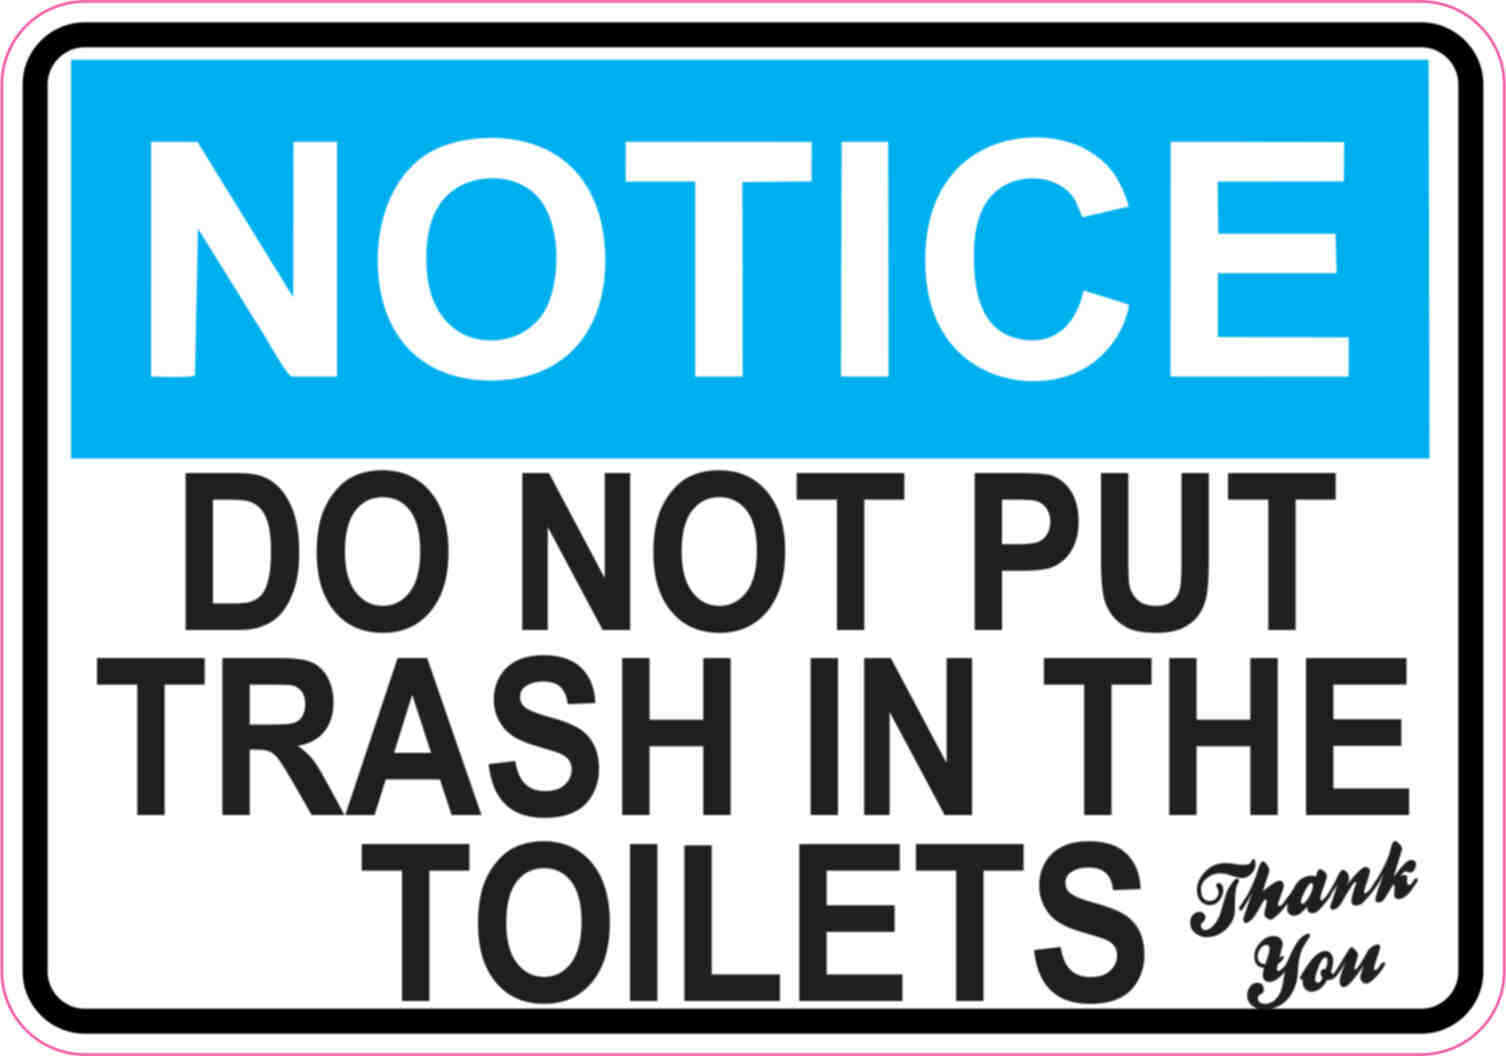 5 x 3.5 Blue Do Not Put Trash In The Toilets Magnet Magnetic Wall Magnets Sign